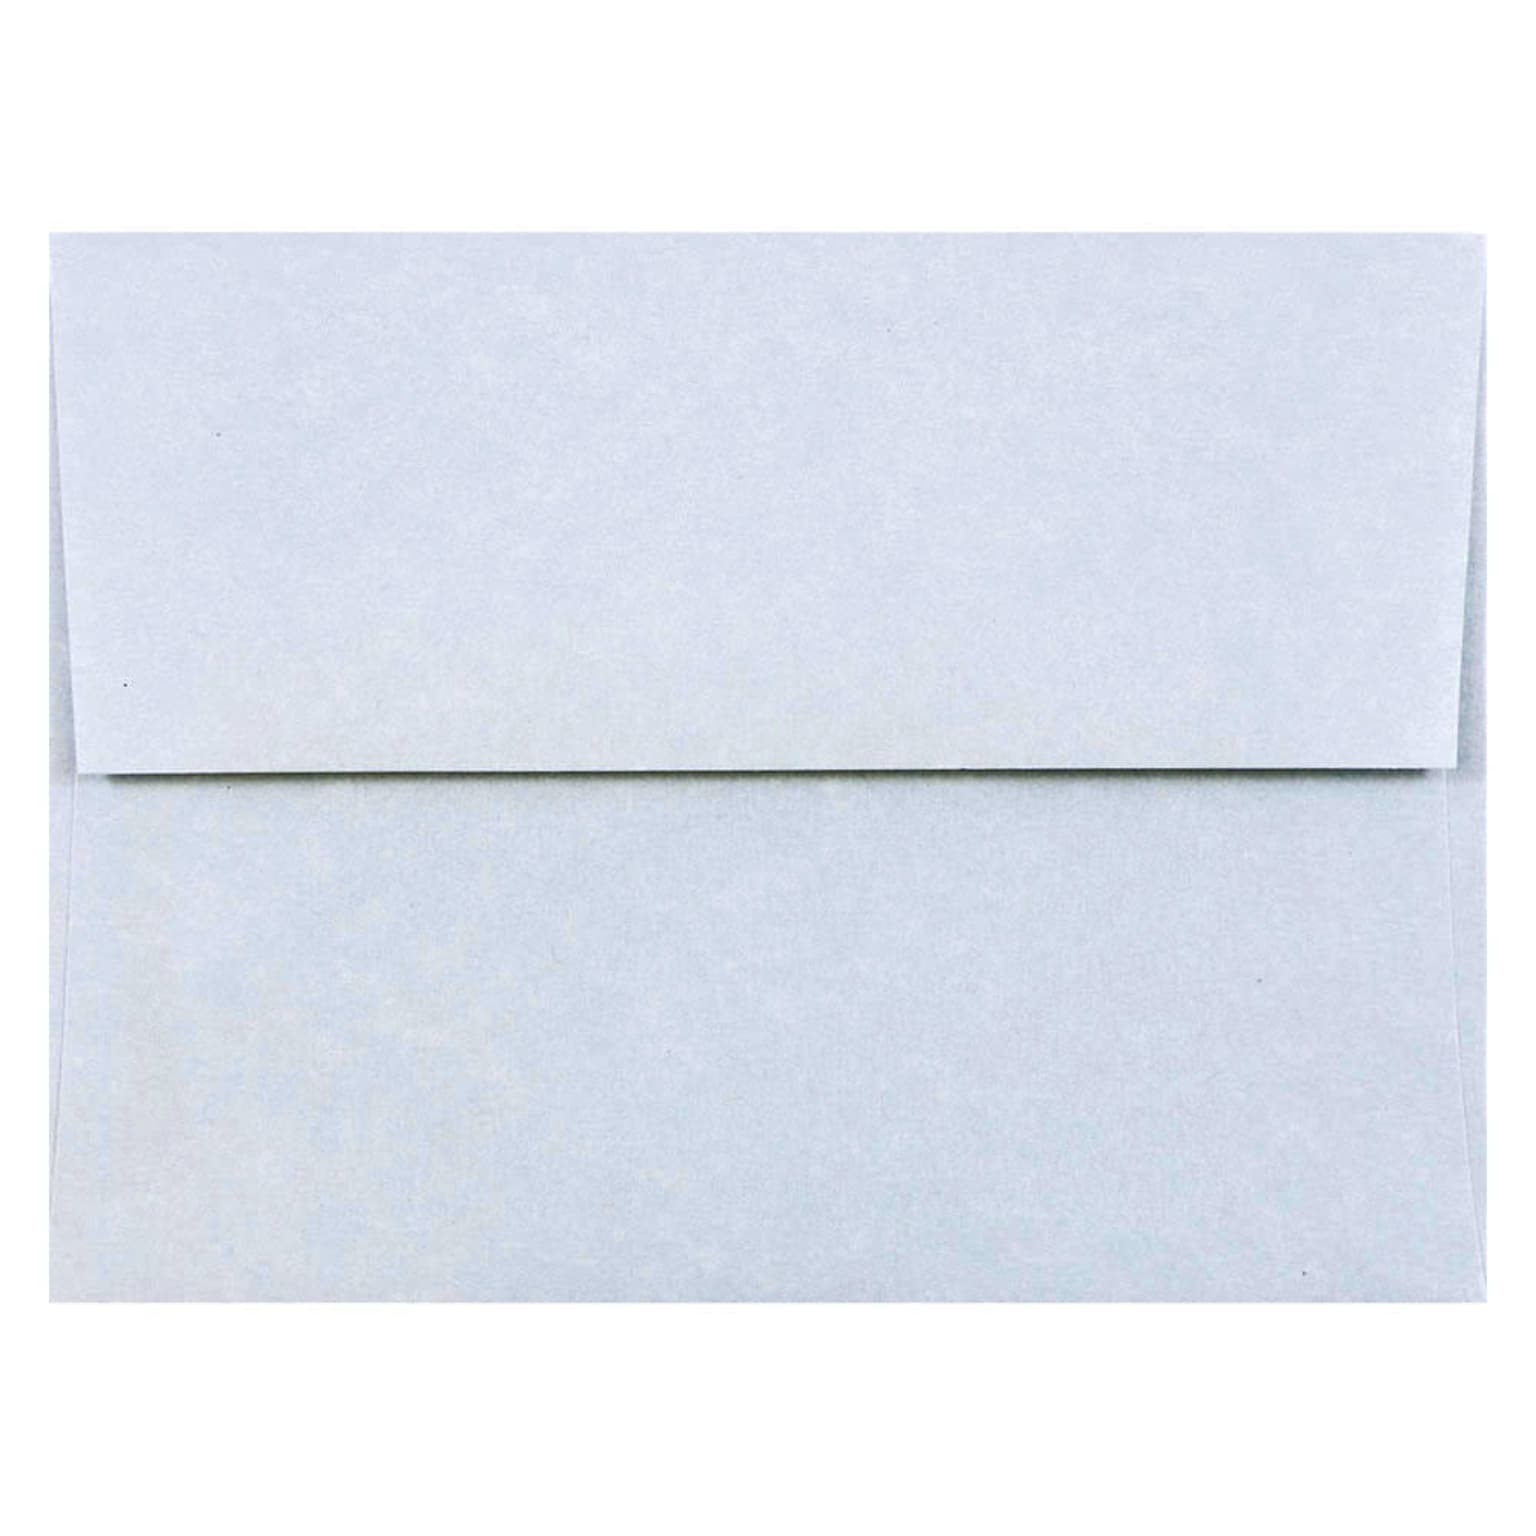 JAM Paper A2 Parchment Invitation Envelopes, 4.375 x 5.75, Blue Recycled, 25/Pack (10197)